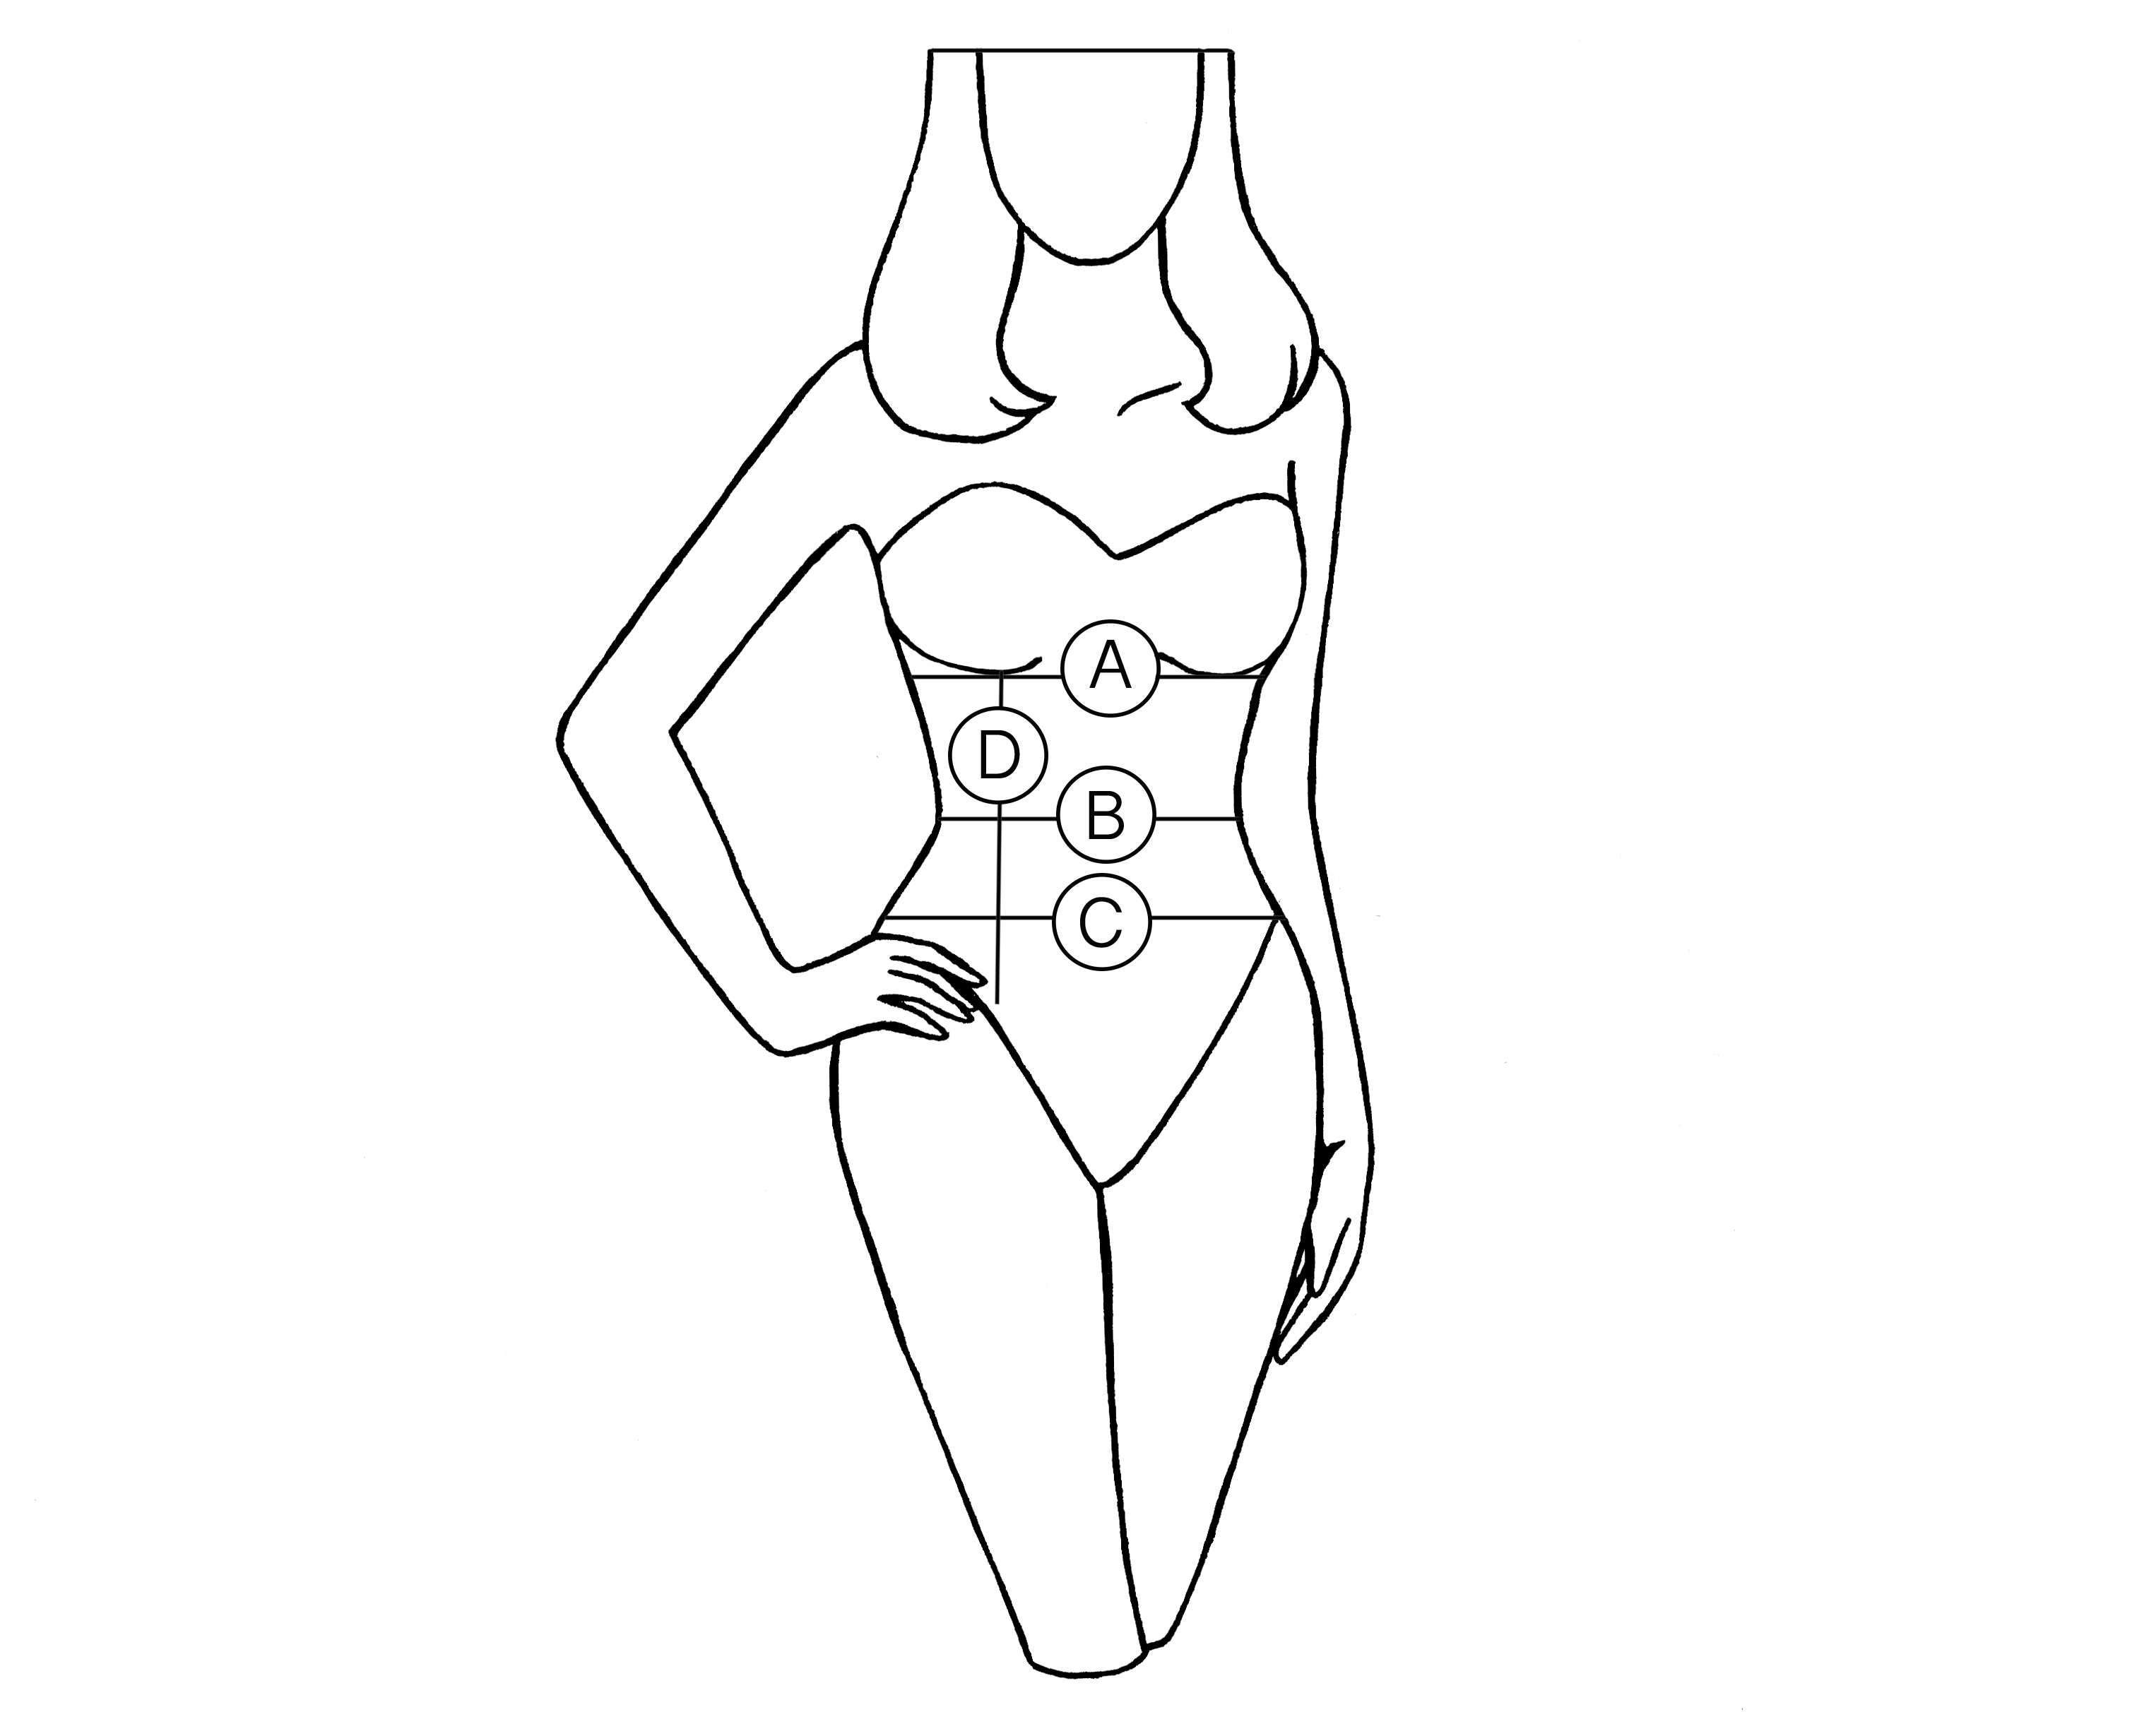 What Measurements Are Required to Customize Your Corset? – Bunny